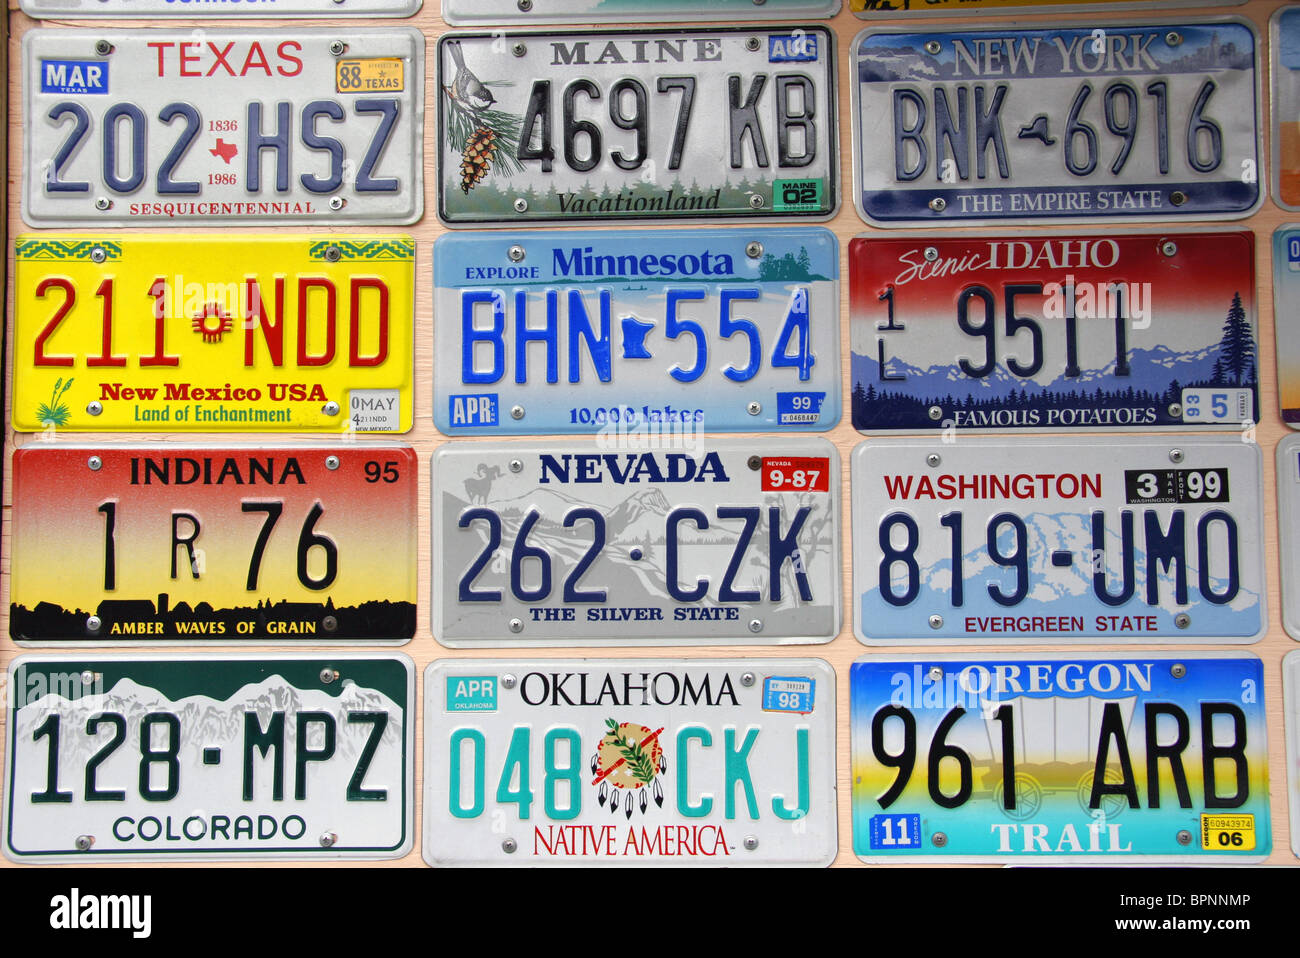 American Number Plate High Resolution Stock Photography and Images - Alamy